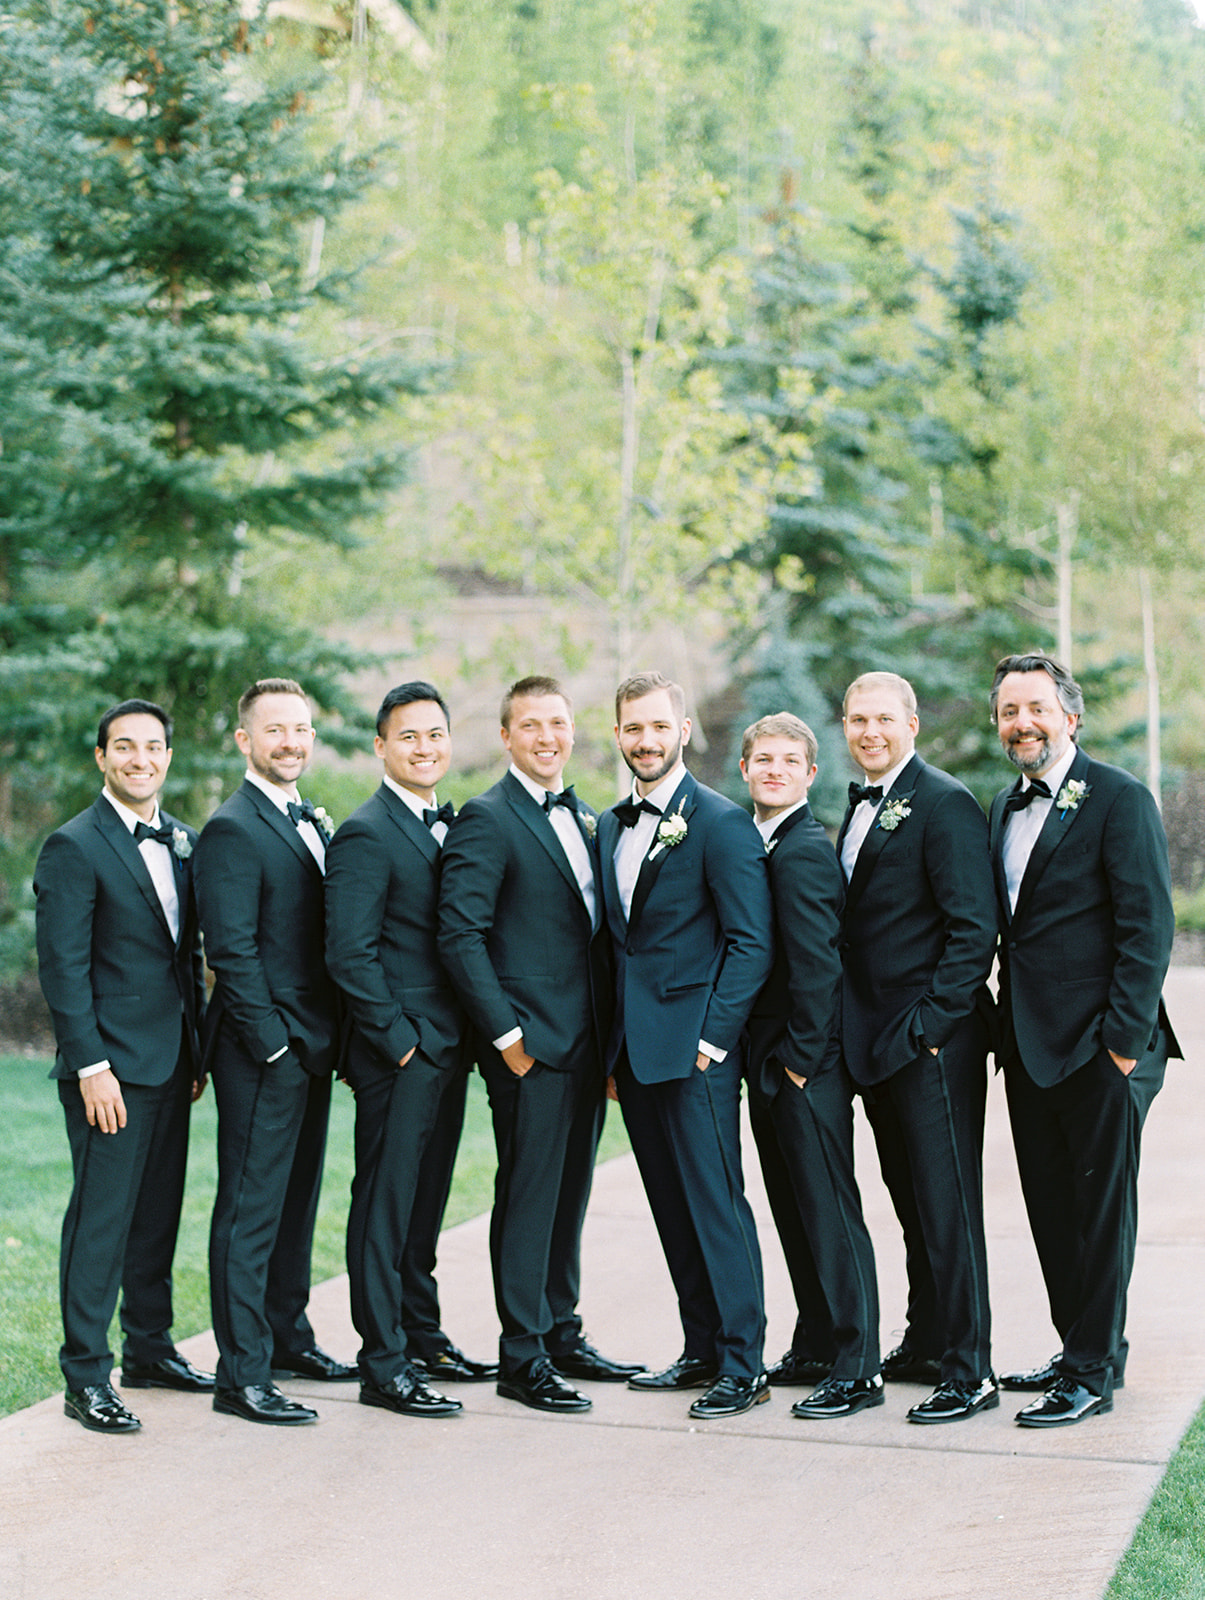 Montage Deer Valley Wedding | Classic Wedding Design | Circular Ceremony Arch | Mountain Wedding | Michelle Leo Events | Utah Event Planner | Kenzie Victory Photography